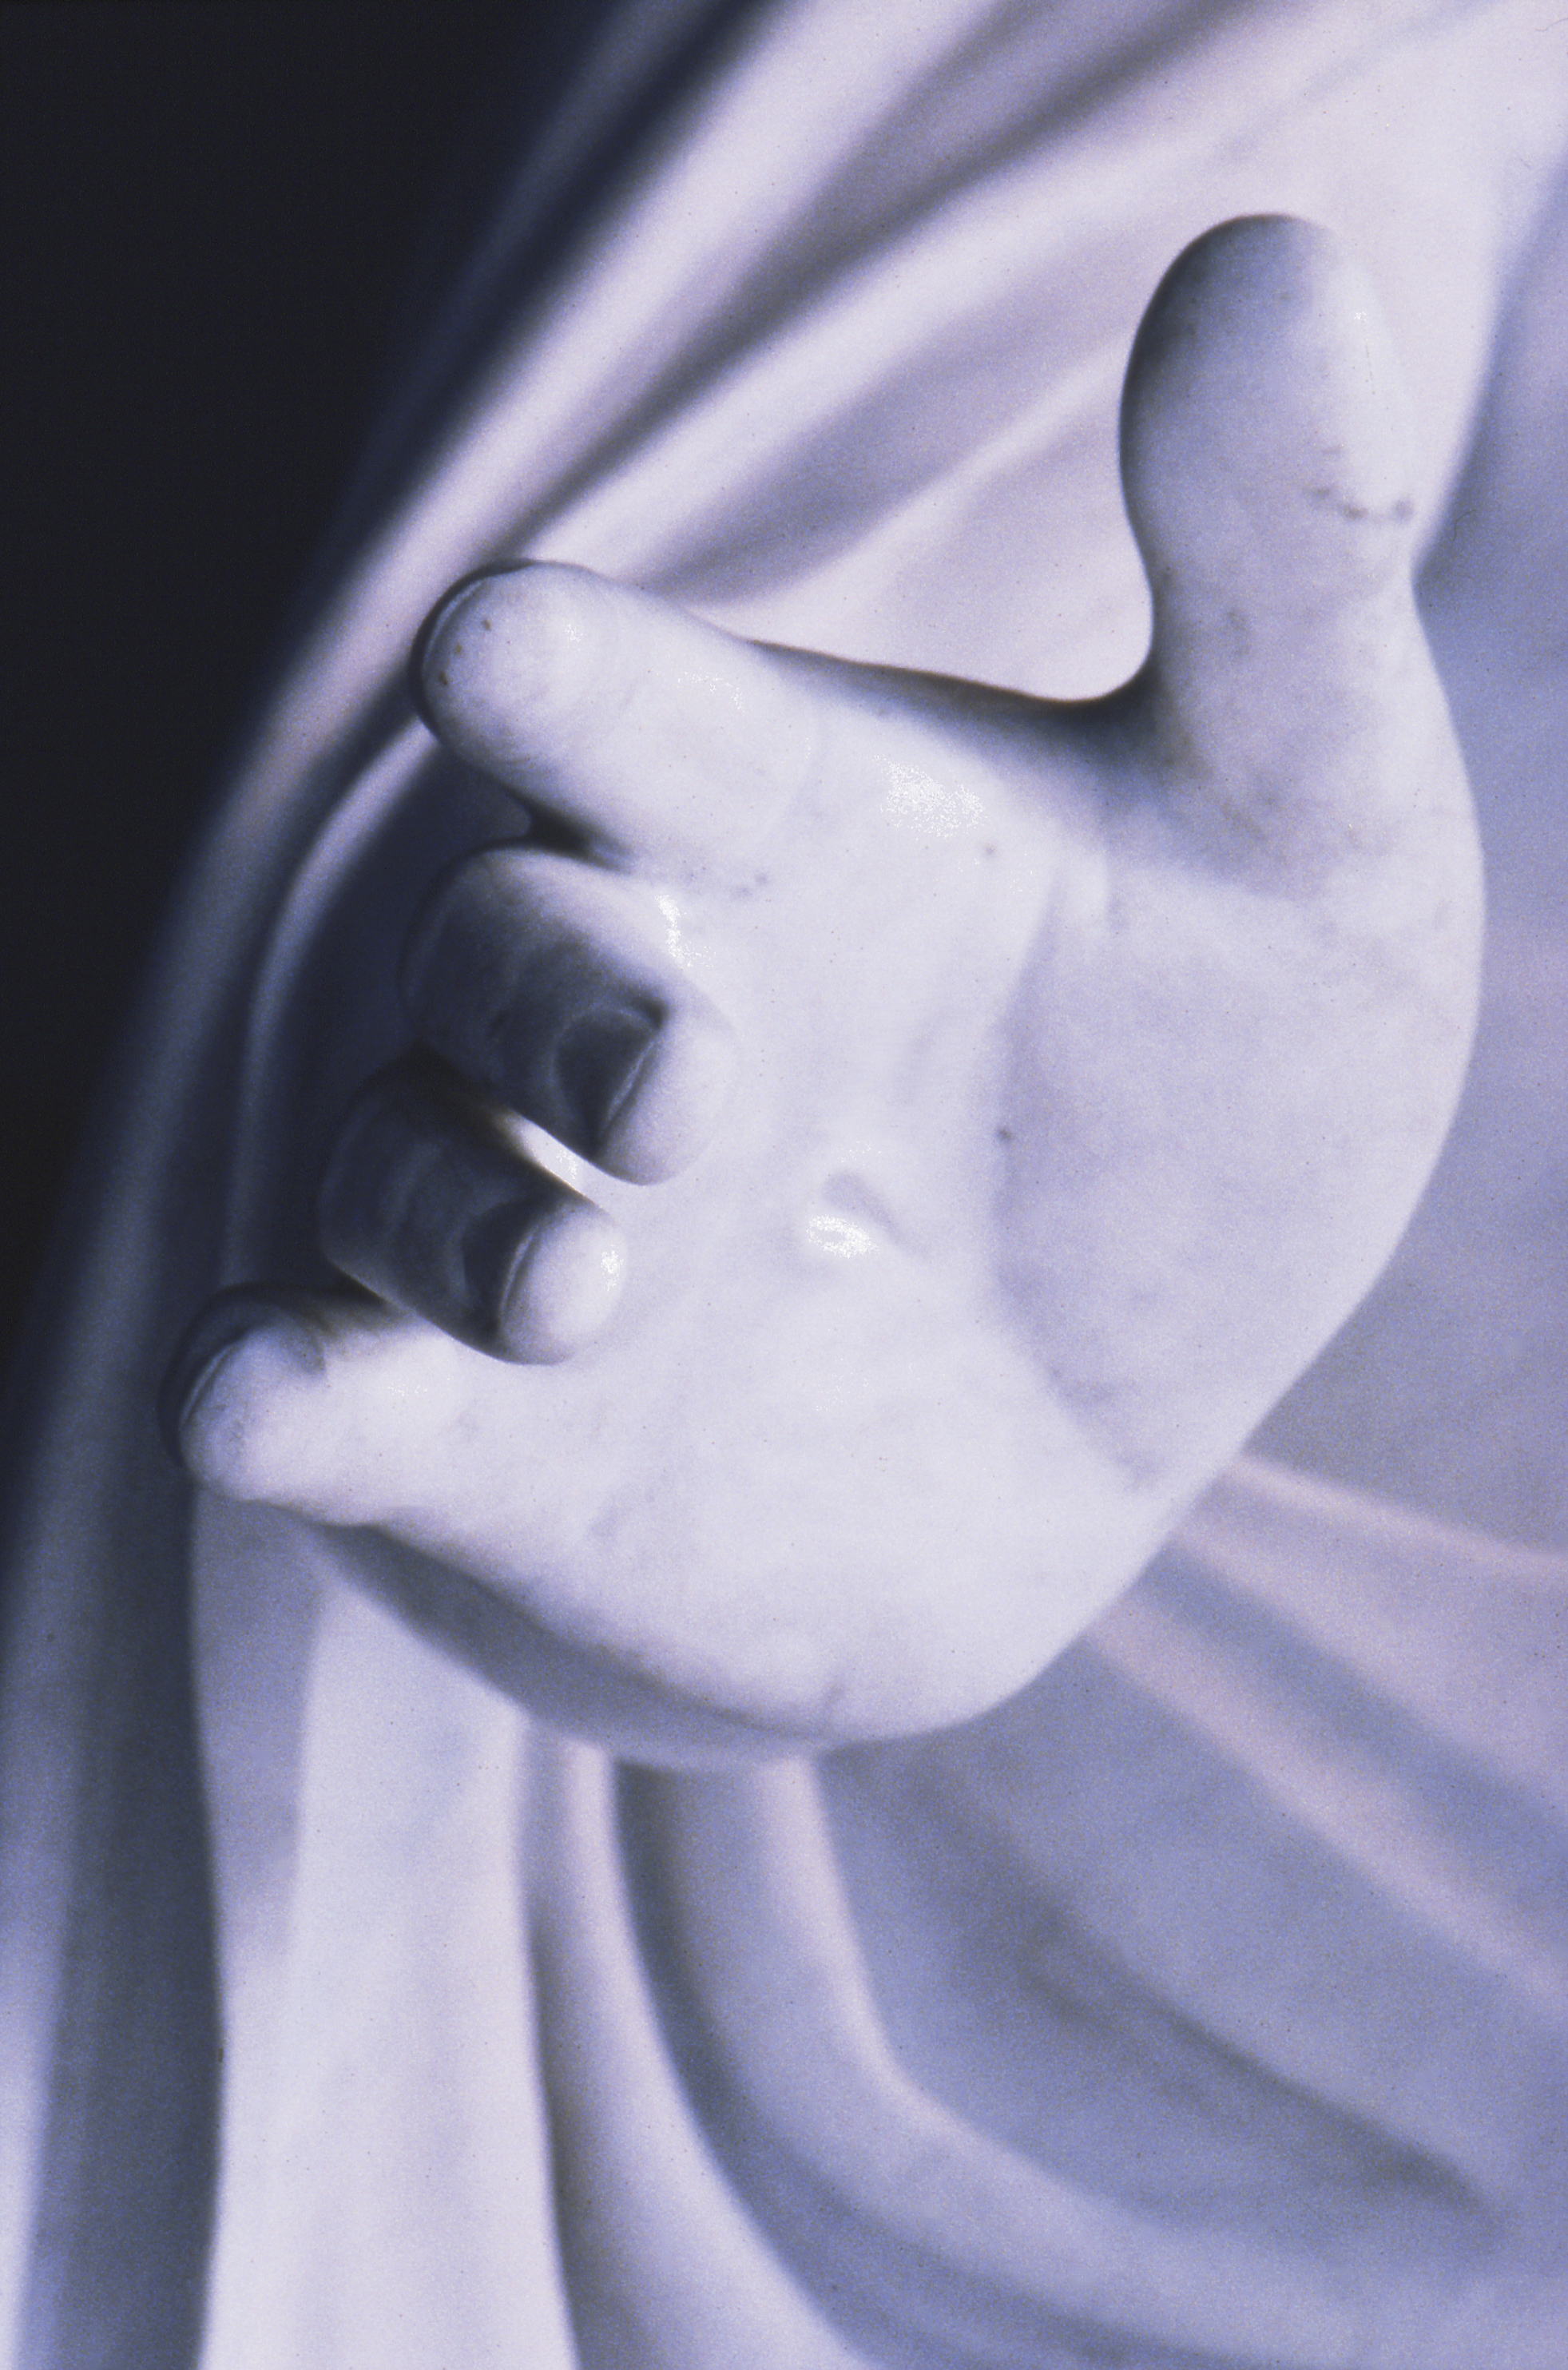 A detail of the hand of the replica of Bertel Thorvaldsen’s Christus statue in the Salt Lake North Visitors’ Center.